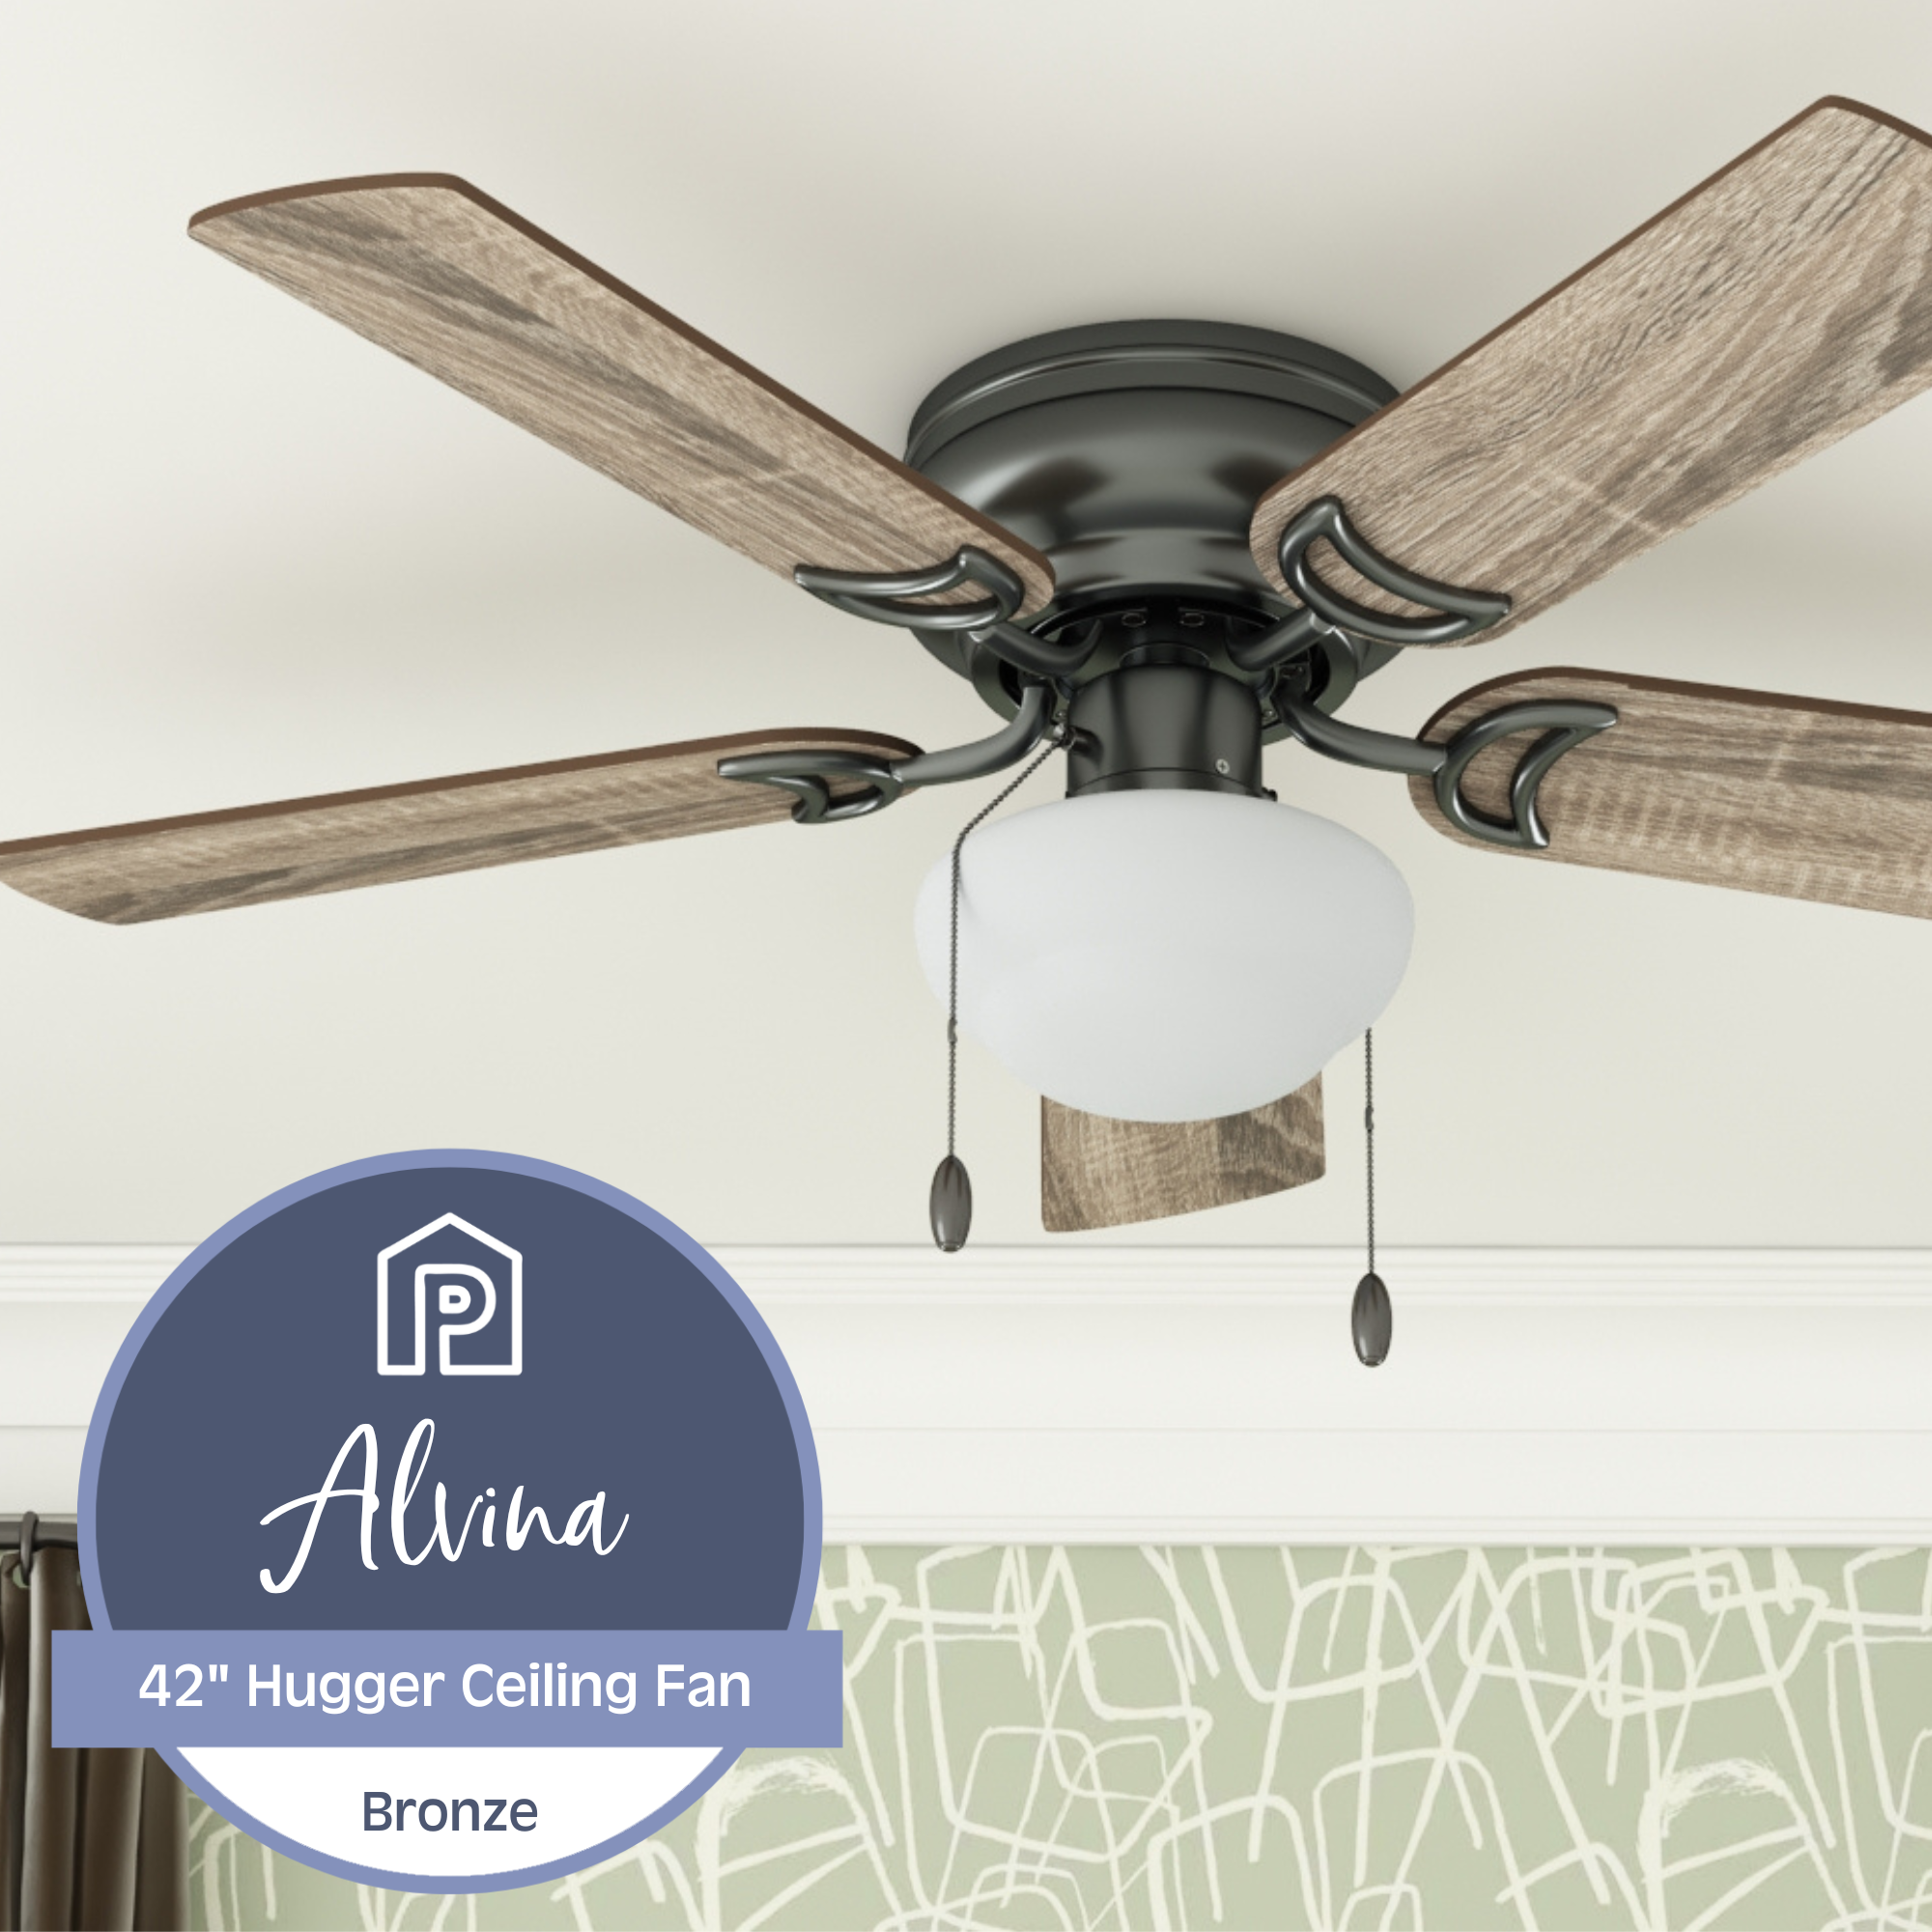 44 Inch Alvina, Bronze, Pull Chain, Ceiling Fan by Prominence Home